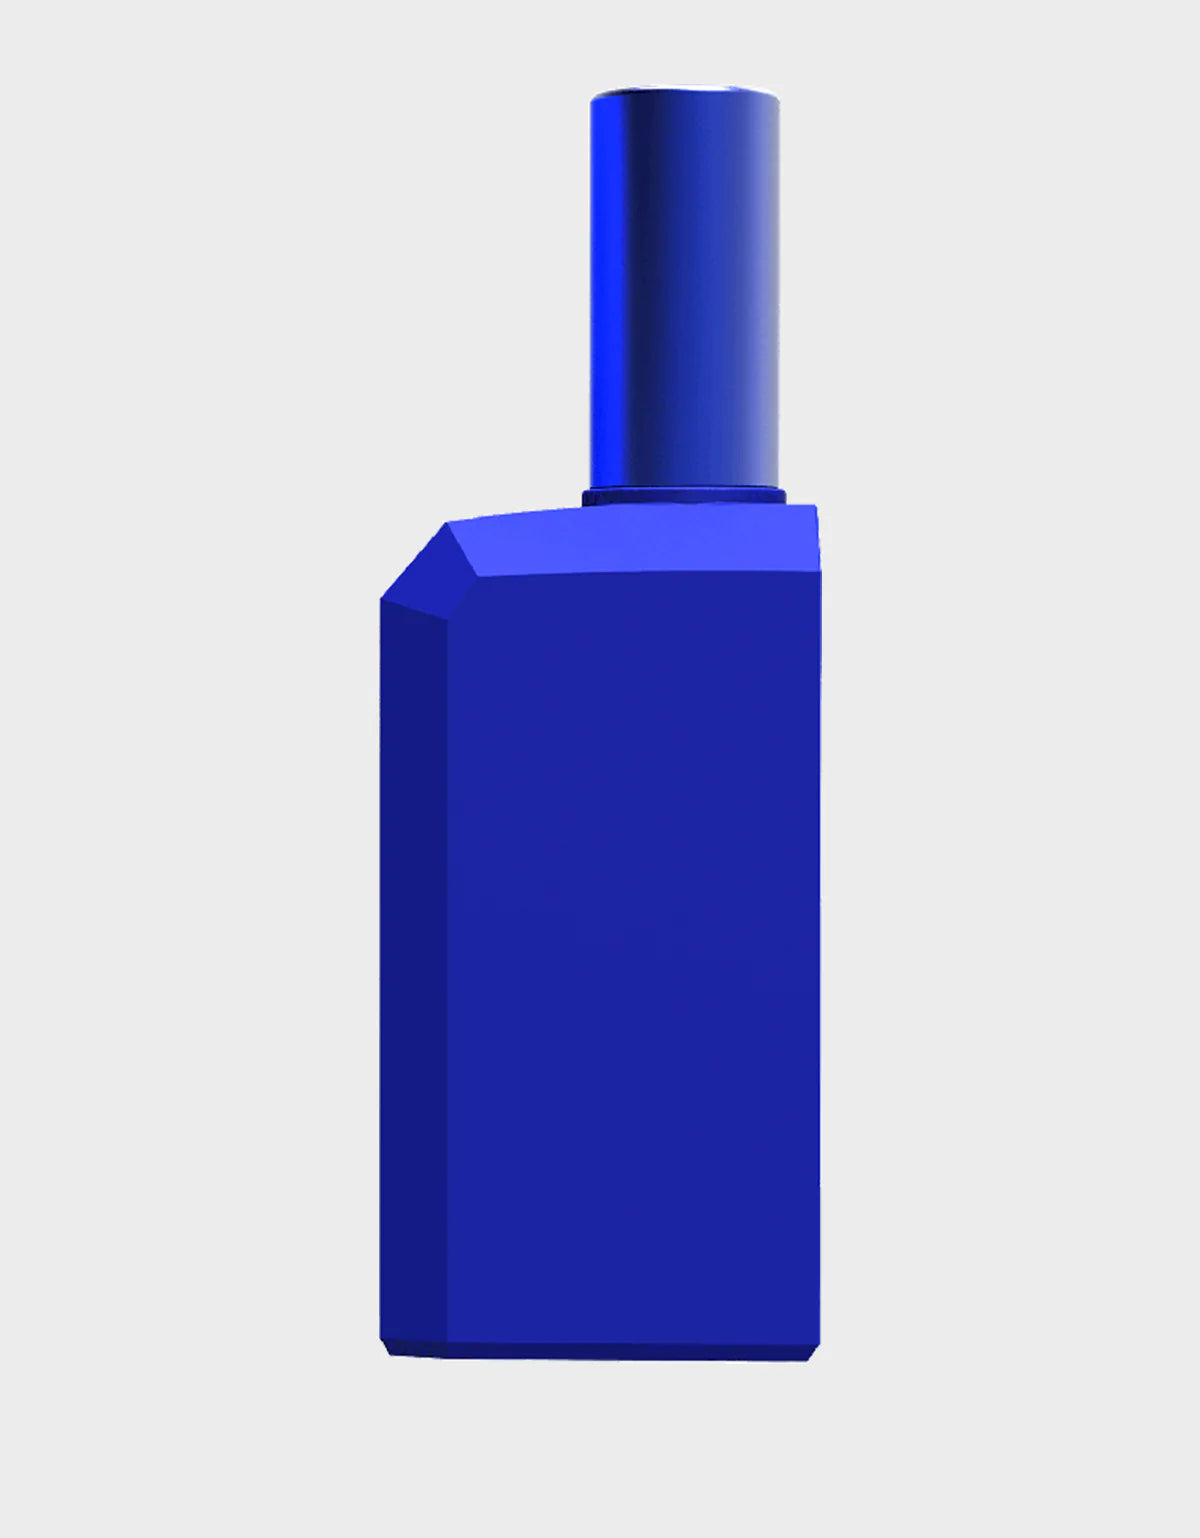 This Is Not A Blue Bottle 1.1 - Niche Gallery